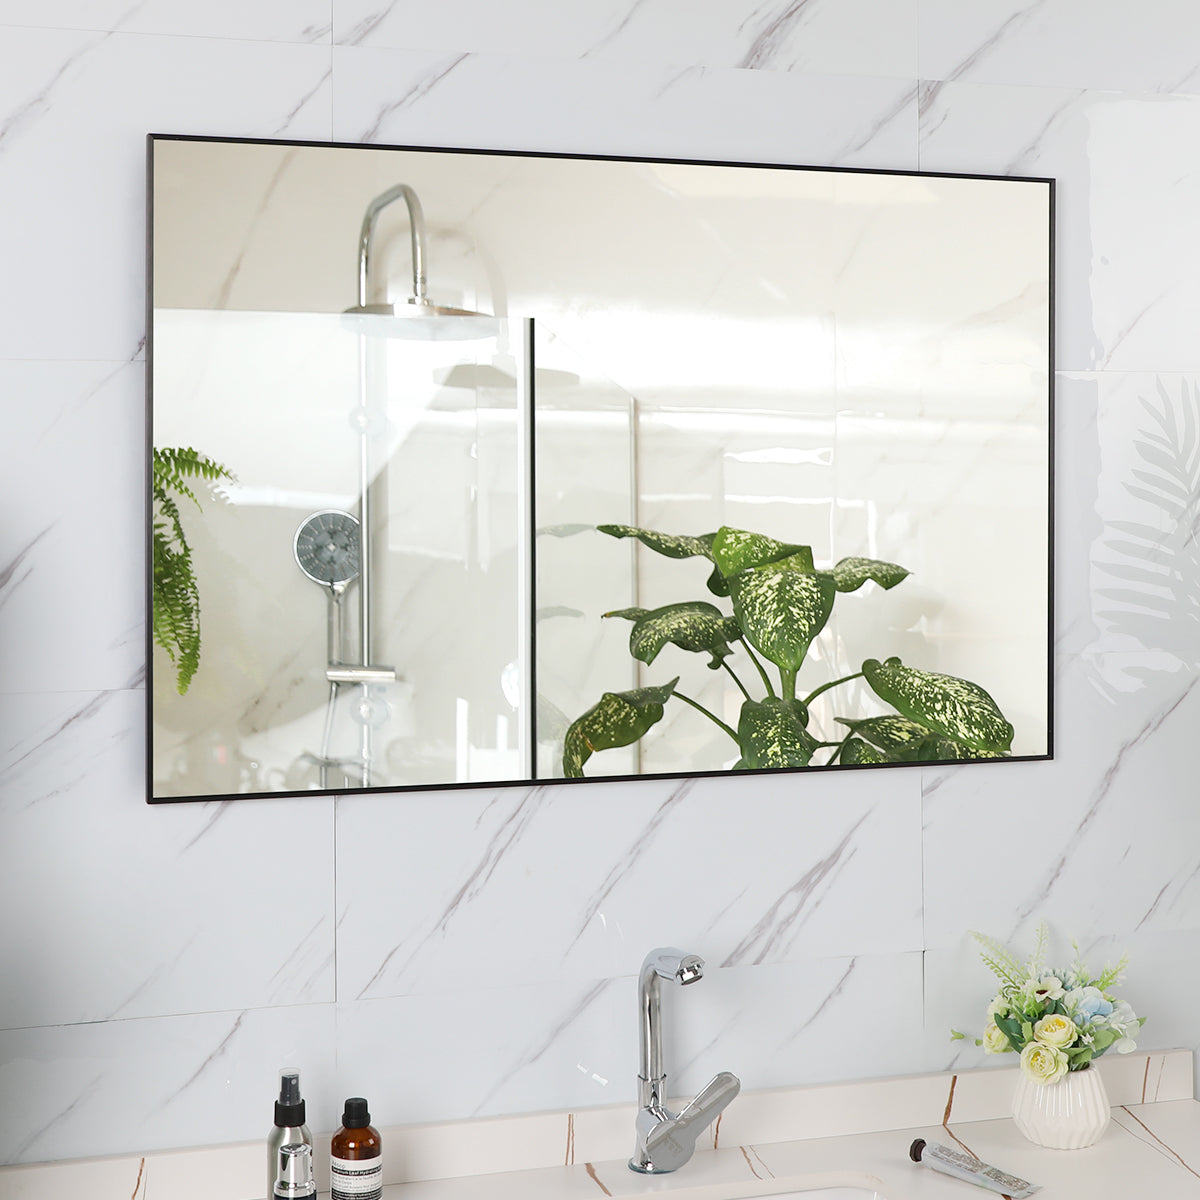 36x24 inches Modern Black Bathroom Mirror with Aluminum Frame Vertical or Horizontal Hanging Decorative Wall Mirrors for Living Room Bedroom